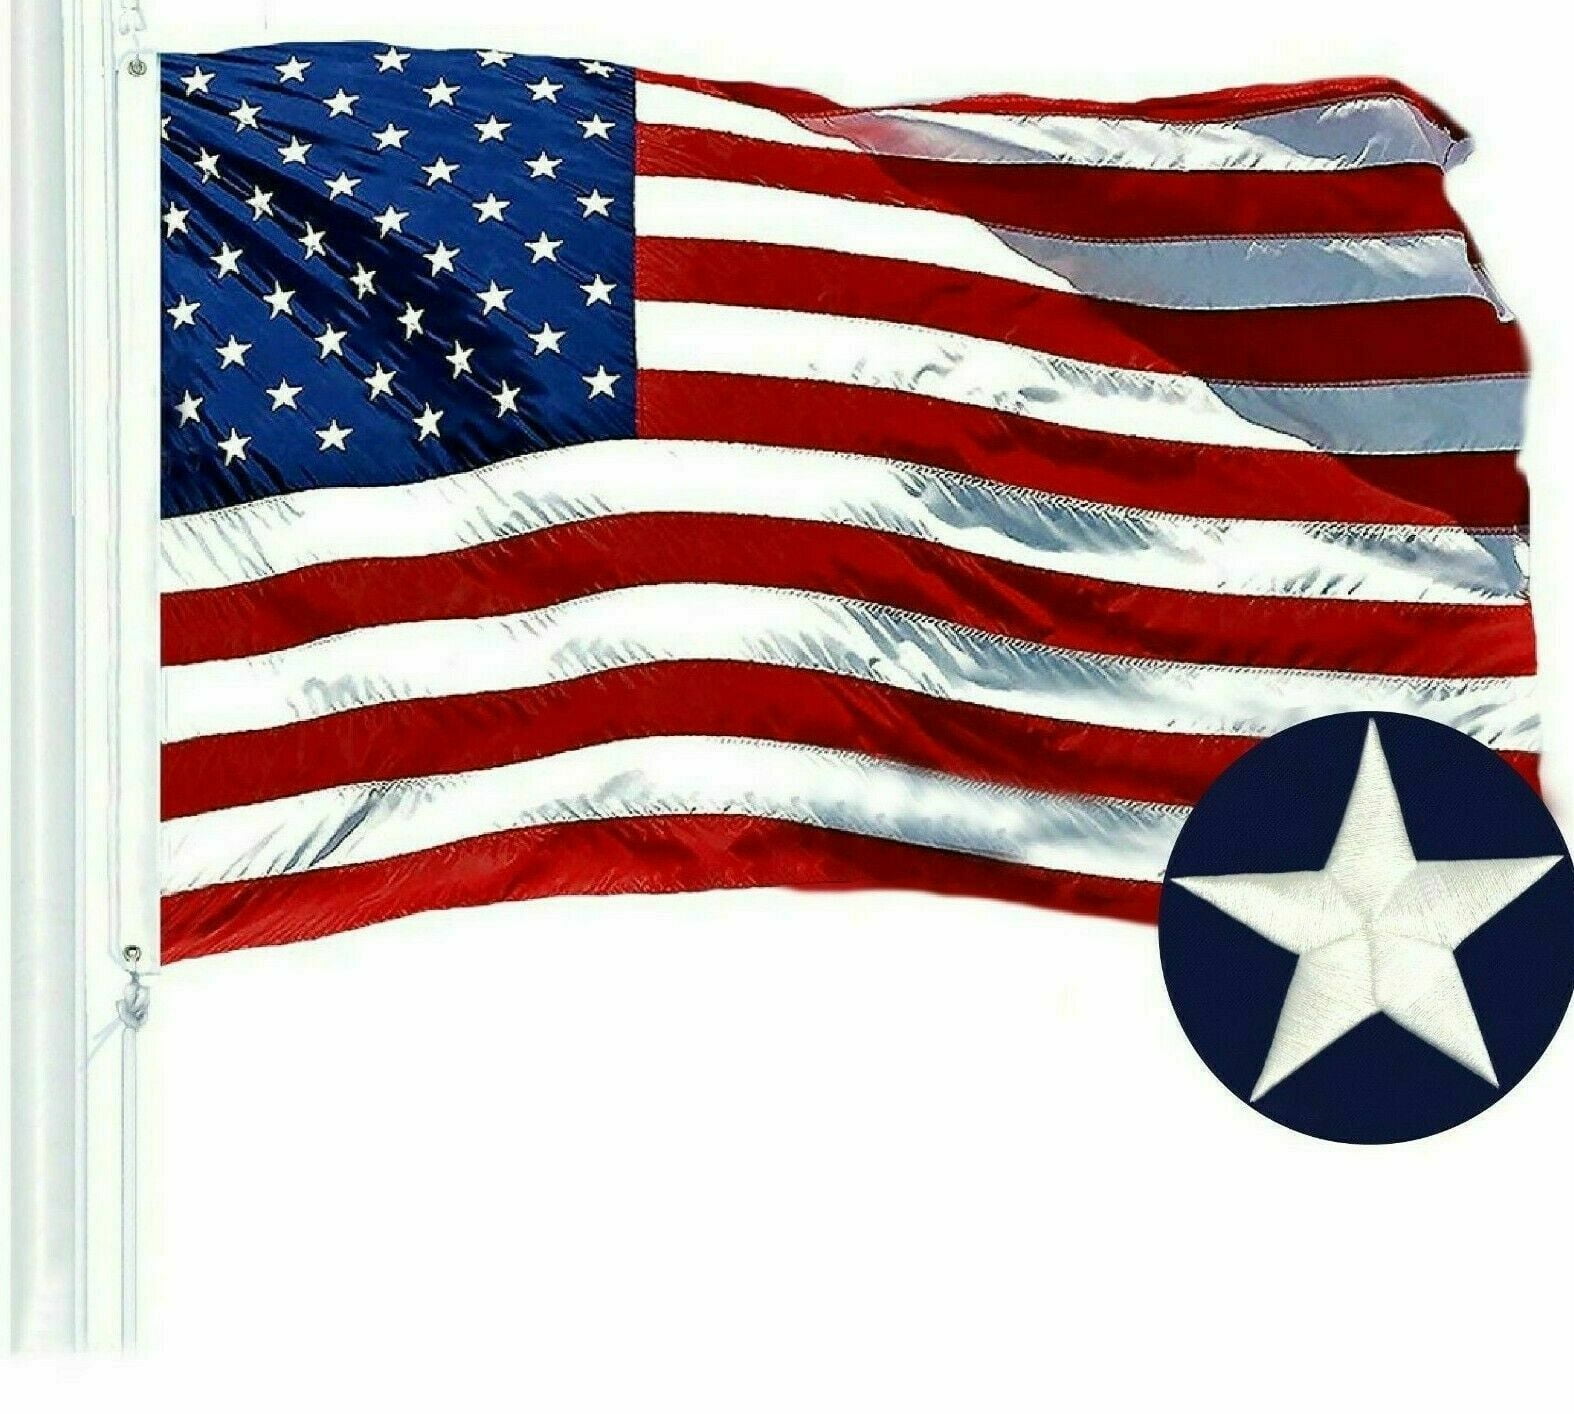 American Flag US USA3'x5' ftEMBROIDERED Stars Sewn Stripes G128 